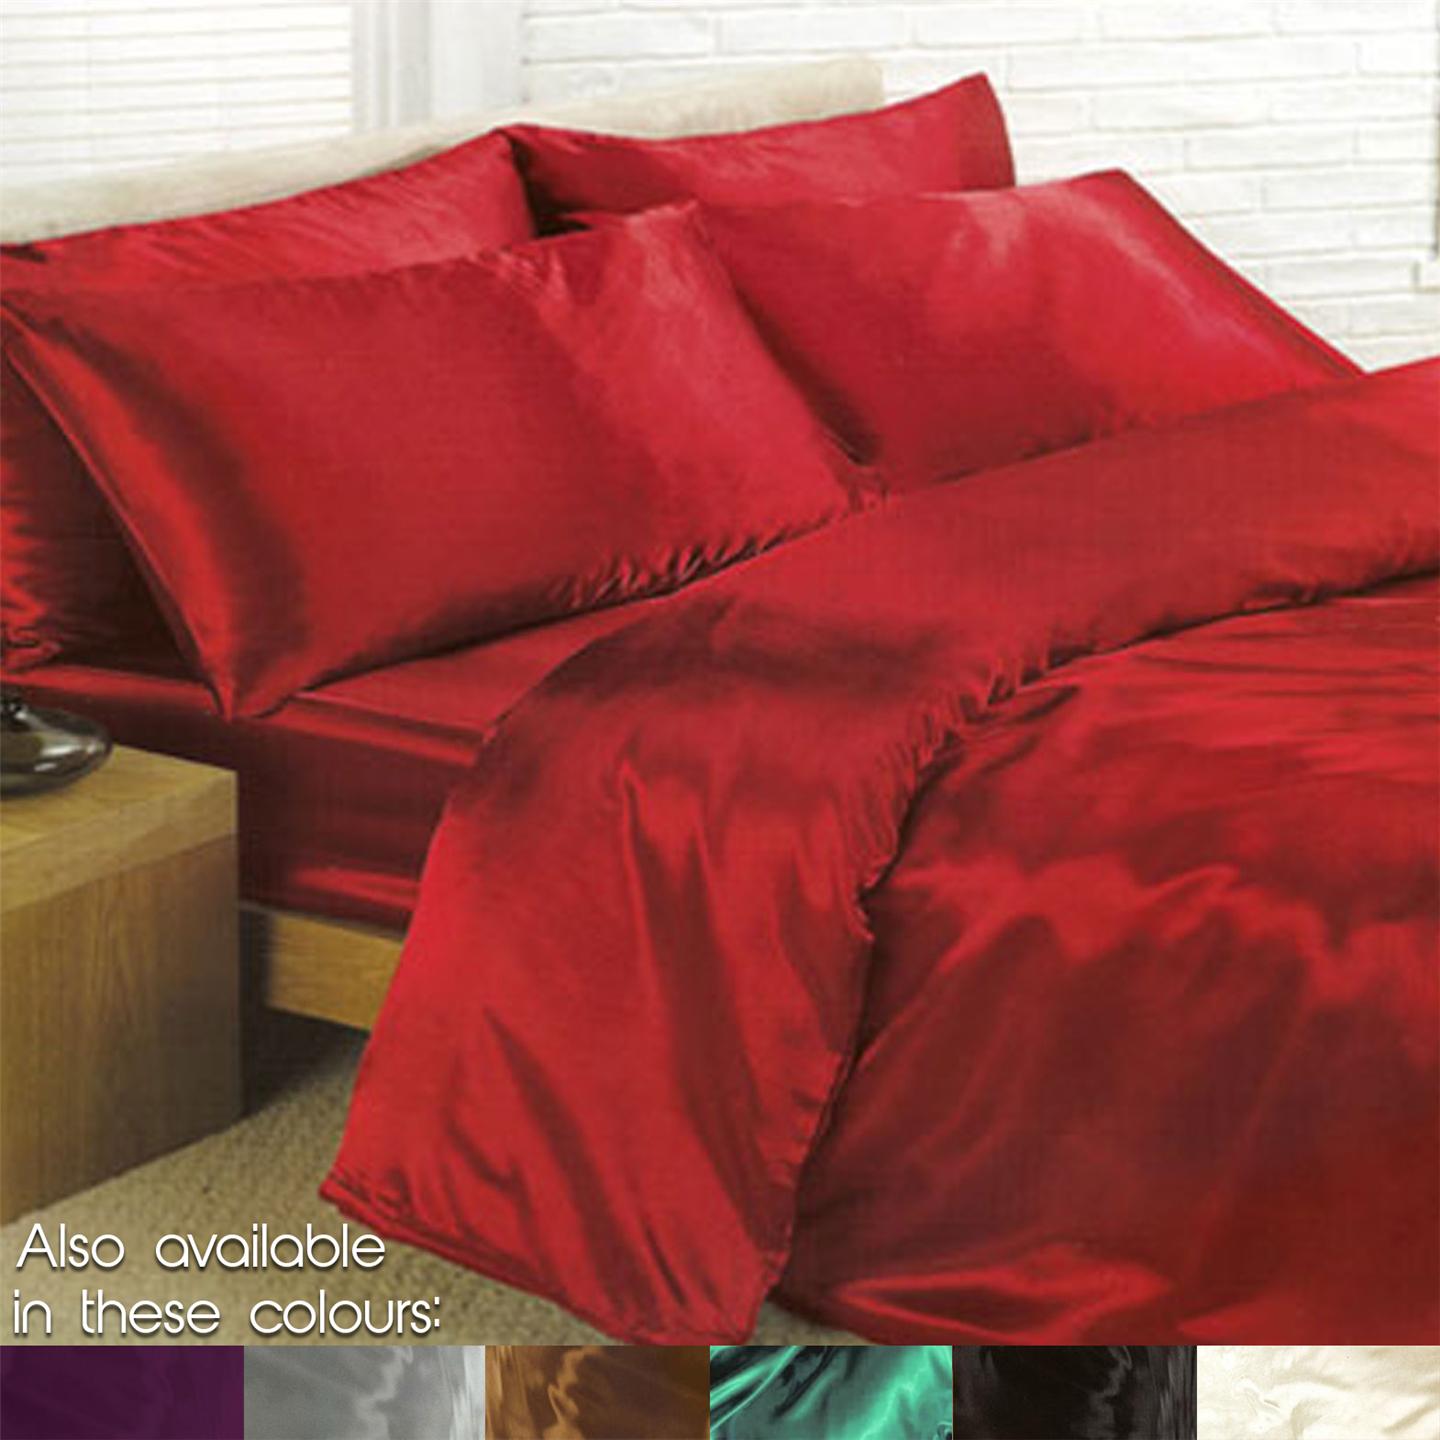 Details about Satin Bedding Sets - 6 Piece Set - Duvet Cover + Fitted ...